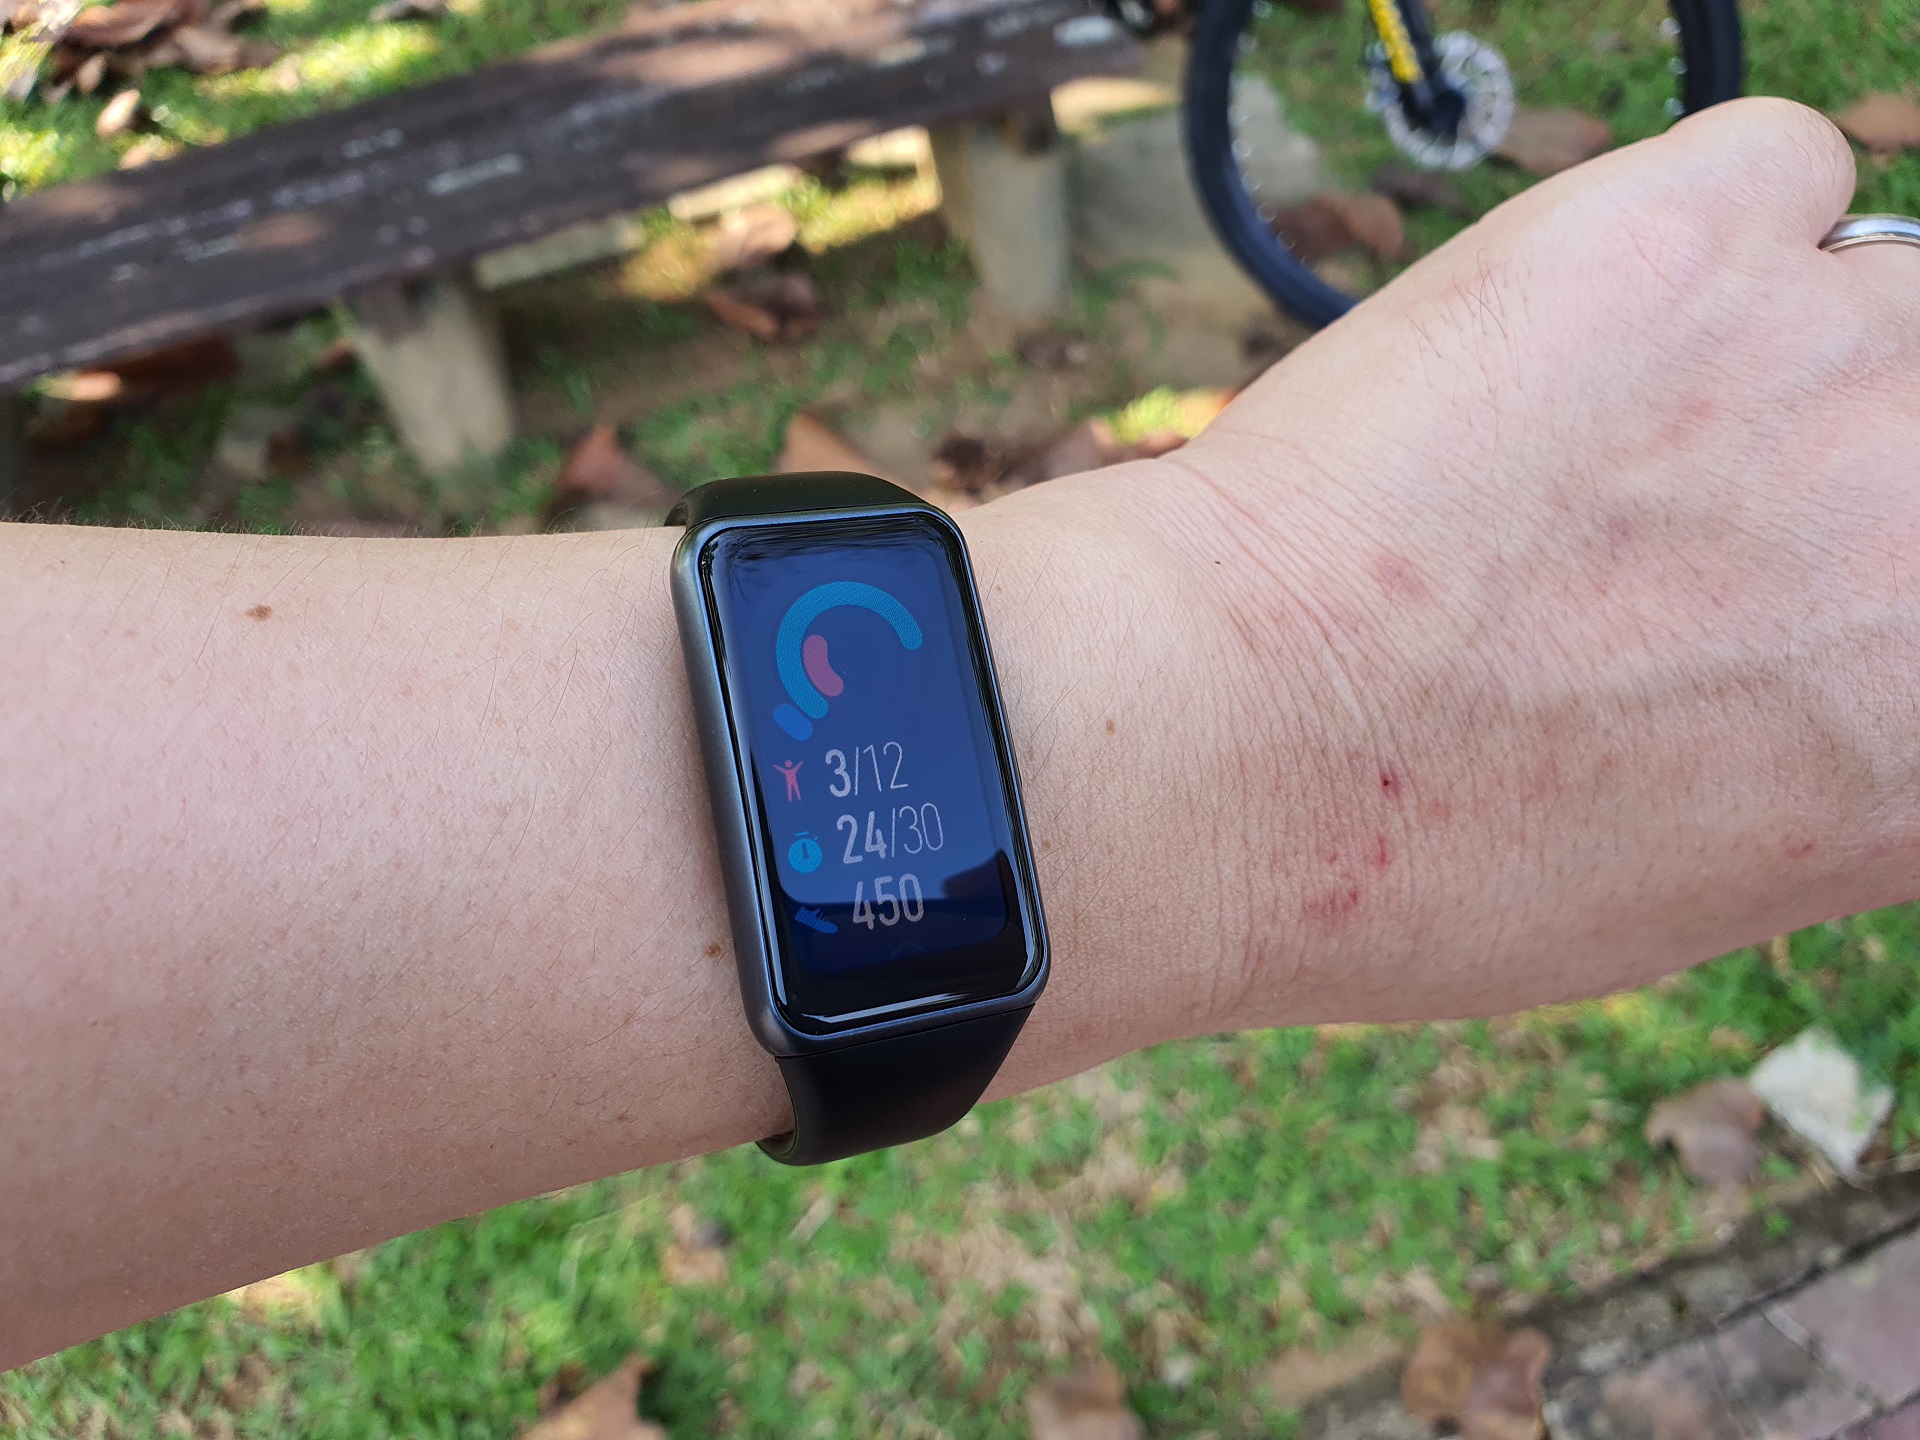 Pelmel in de tussentijd Geaccepteerd Review: The Huawei Band 6, one of the best fitness trackers out there